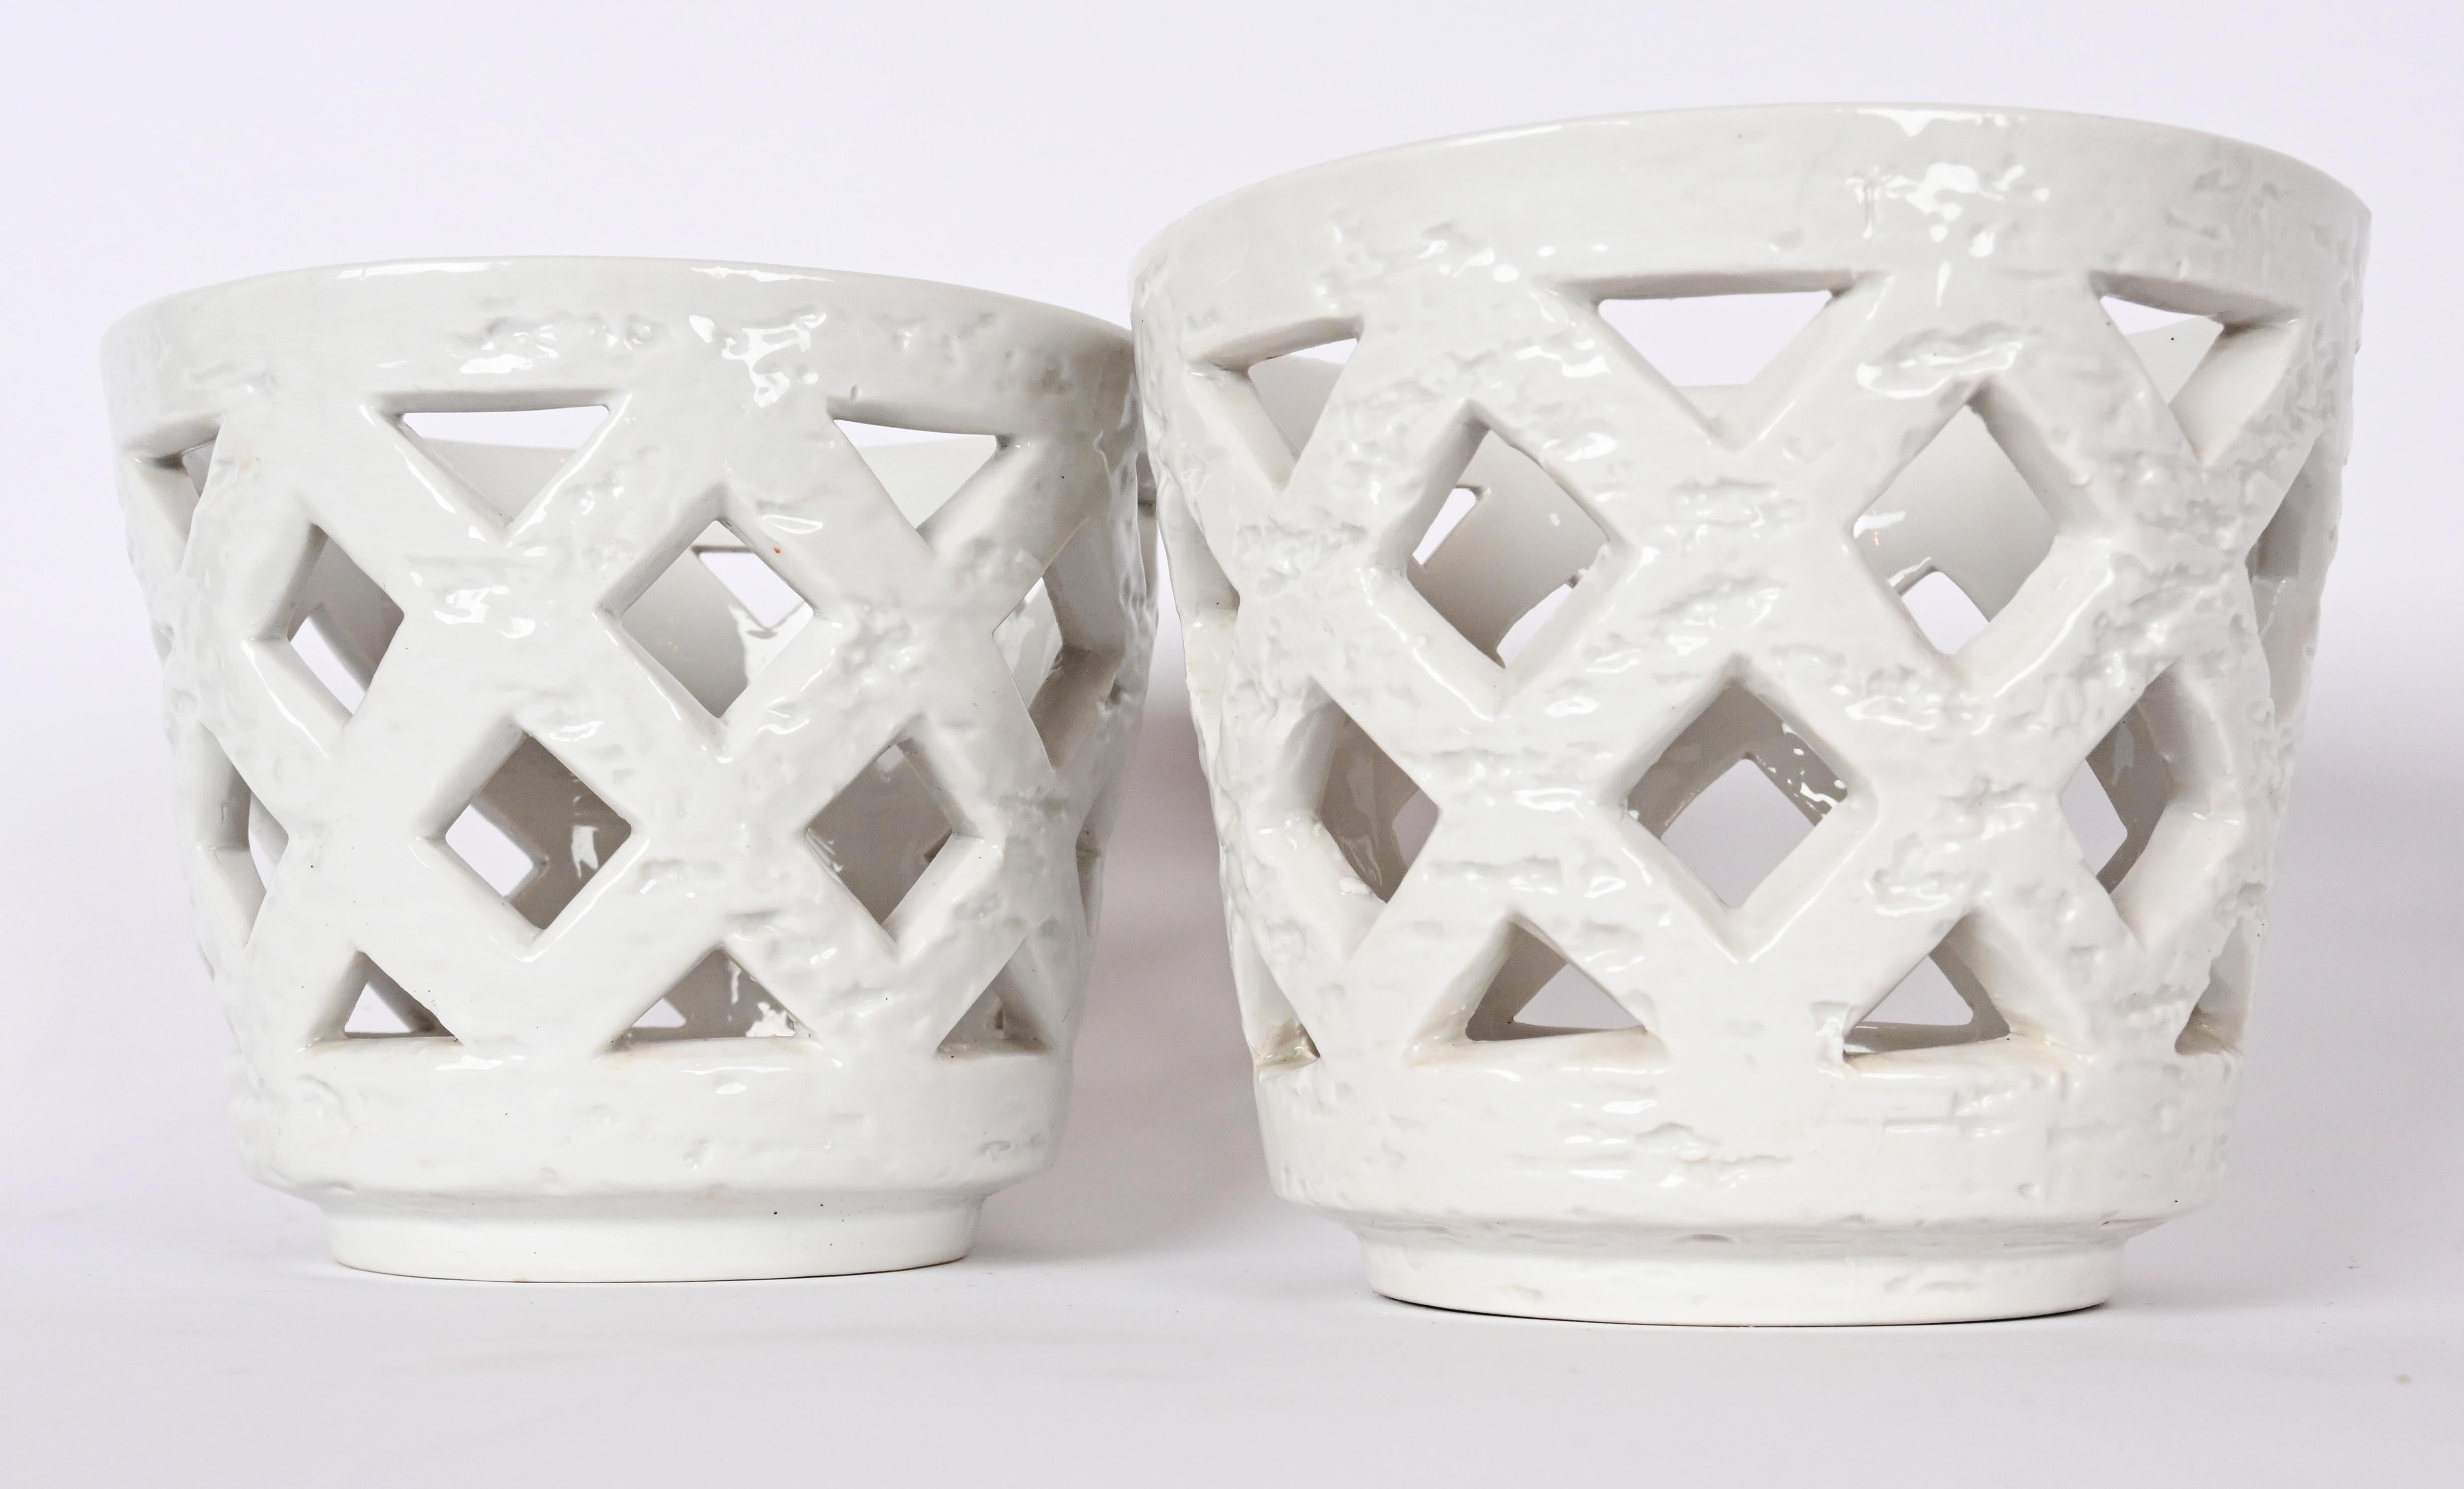 Gunnar Nylund (1904-1977) Ceramic Planters circa. 1930. Made with lattice design work and stamped with a production seal at the bottom.